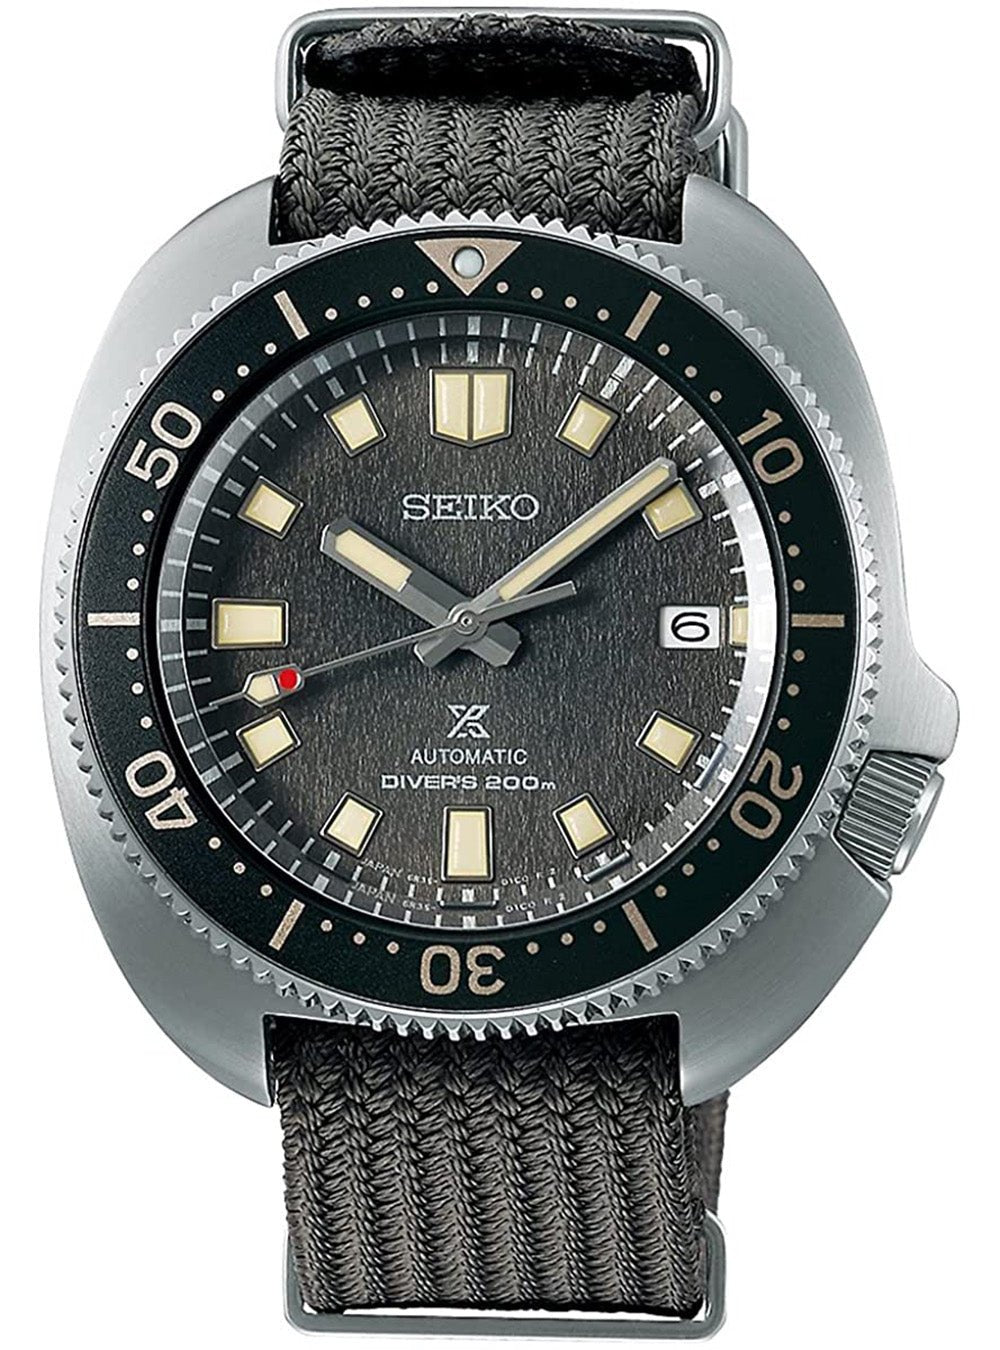 SEIKO PROSPEX 1970 MECHANICAL DIVER SCUBA SBDC143 LIMITED EDITION MADE IN  JAPAN JDM